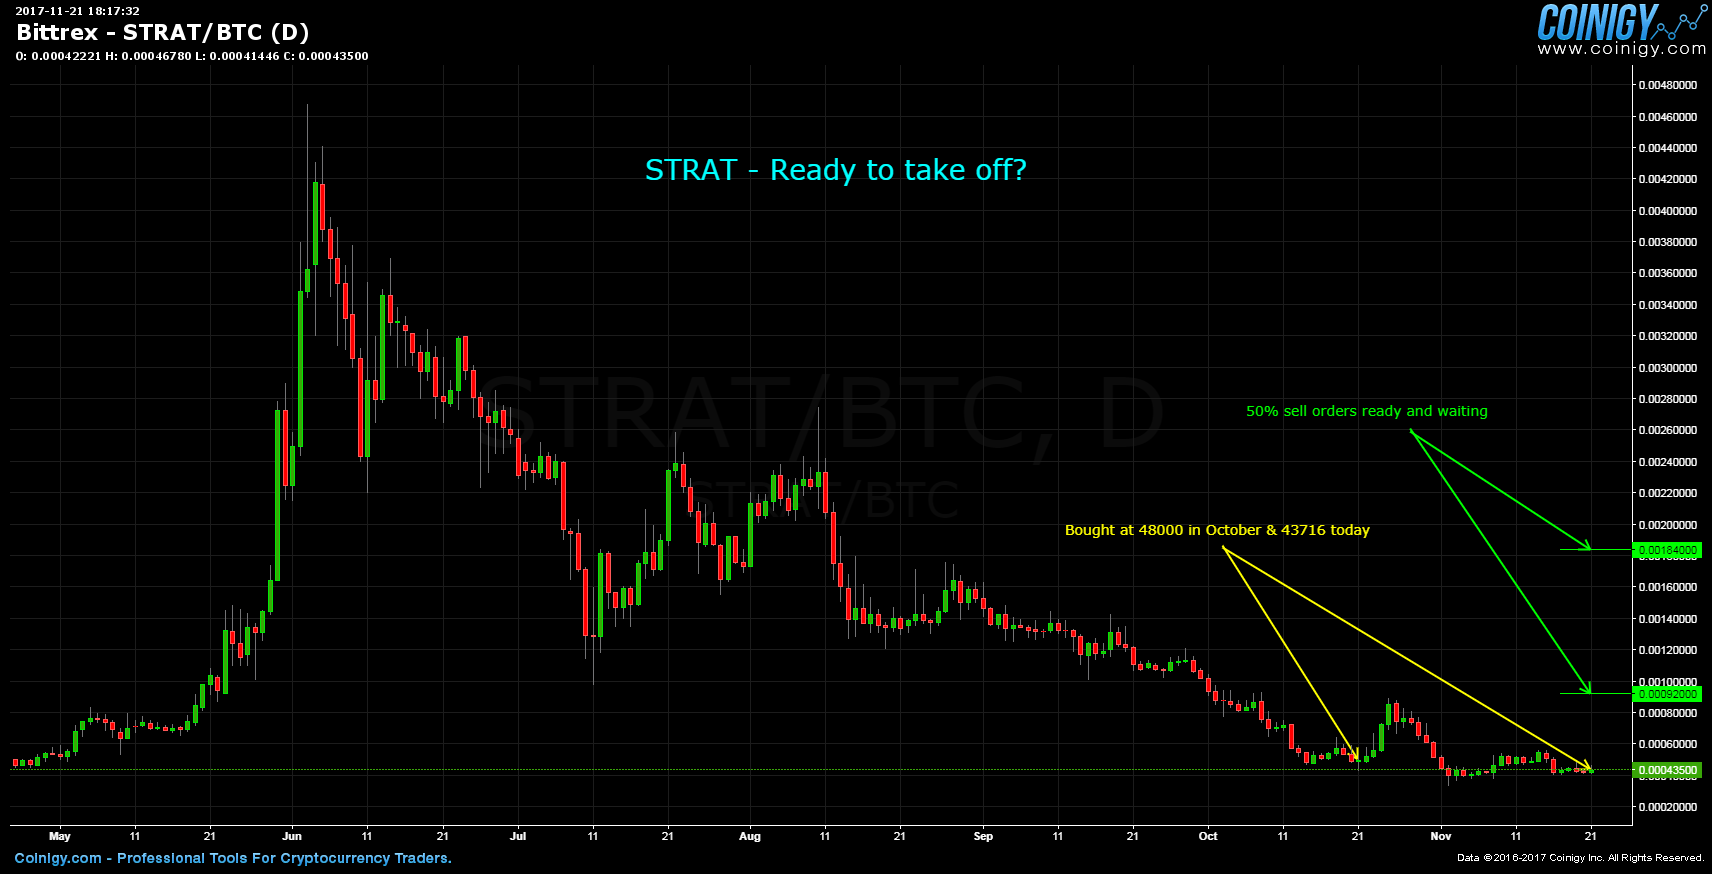 Bittrex STRAT/BTC Chart - Published on Coinigy.com on ...